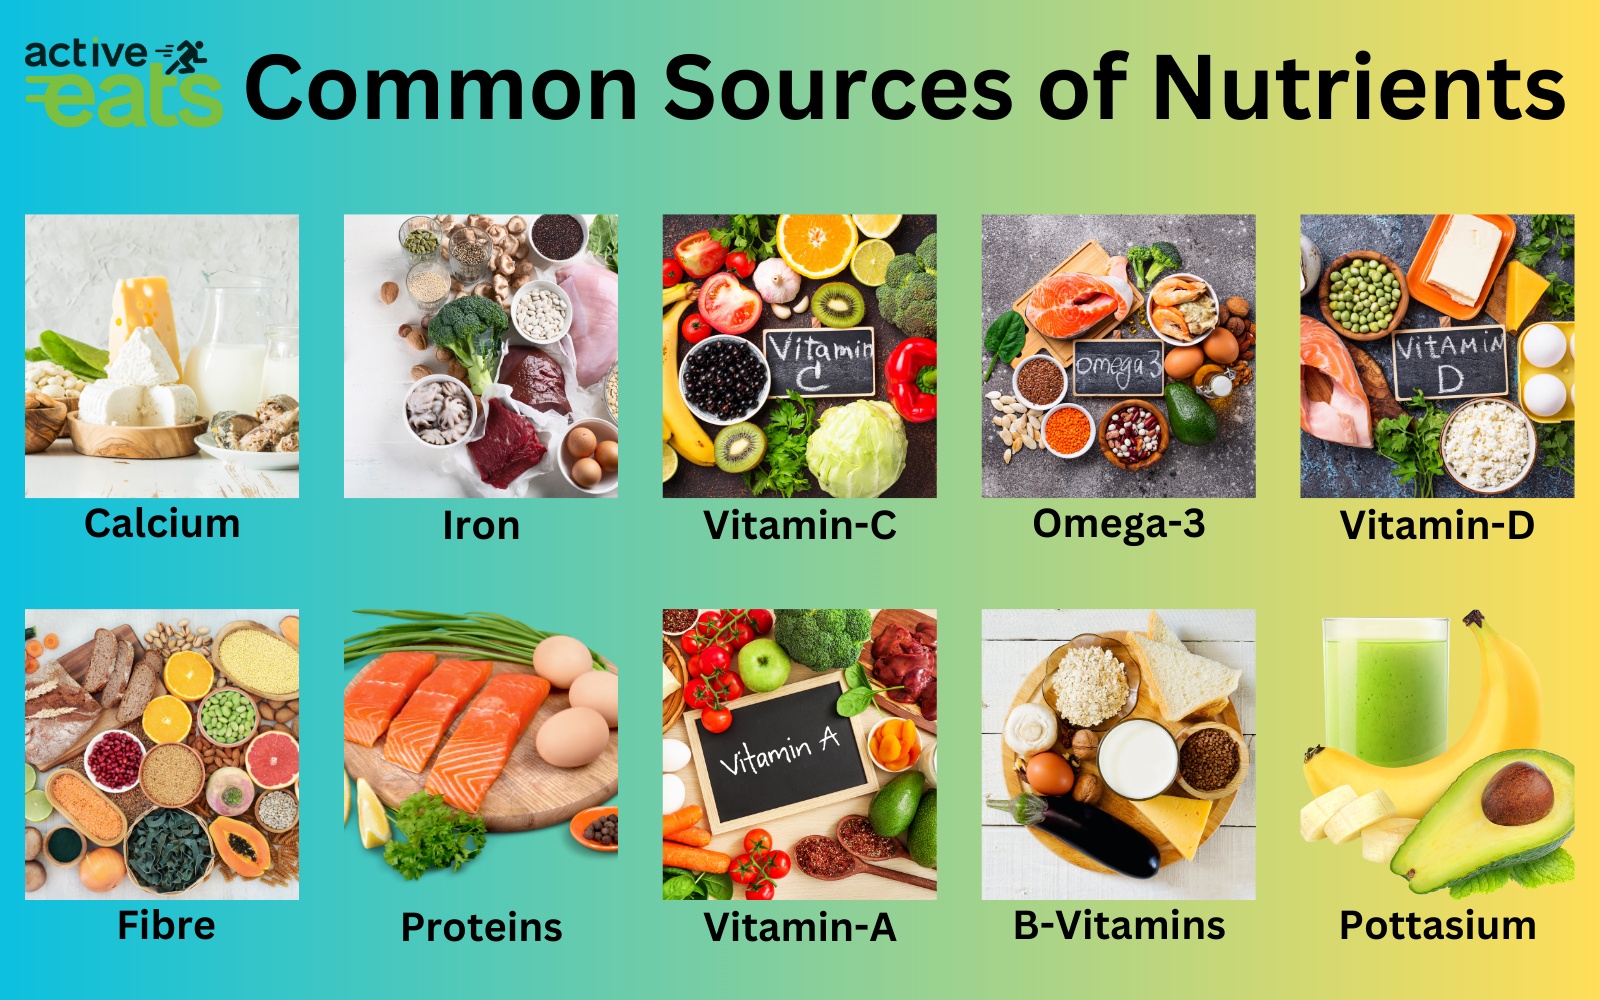 An informative visual representation of the top 8 common nutrient sources, with each source accompanied by an image and a brief description. Fruits: A variety of colorful fruits, such as apples, oranges, grapes, and berries, are featured, emphasizing their contribution to essential vitamins, antioxidants, and dietary fiber. Vegetables: A selection of fresh vegetables, including leafy greens, carrots, and bell peppers, symbolizing a rich source of vitamins, minerals, and dietary fiber. Whole Grains: Whole grains like brown rice, quinoa, and oats are showcased, signifying their role in providing complex carbohydrates, fiber, and various nutrients. Lean Protein: An image of lean protein sources, such as skinless poultry, tofu, and fish, representing proteins low in saturated fats and essential for muscle growth and repair. Dairy: A representation of dairy products like milk and yogurt, highlighting their calcium, vitamin D, and protein content, important for bone health. Nuts and Seeds: Assorted nuts and seeds, including almonds, chia seeds, and walnuts, symbolize the presence of healthy fats, protein, and essential nutrients. Legumes: A variety of legumes, like lentils, chickpeas, and black beans, emphasize their high protein and fiber content, essential for overall health. Fish: An illustration of fish, such as salmon and sardines, highlighting their omega-3 fatty acids, protein, and various vitamins and minerals, beneficial for heart and brain health. This visual provides a comprehensive and informative guide to common nutrient sources, each contributing to a balanced and healthy diet, meeting a range of dietary needs.